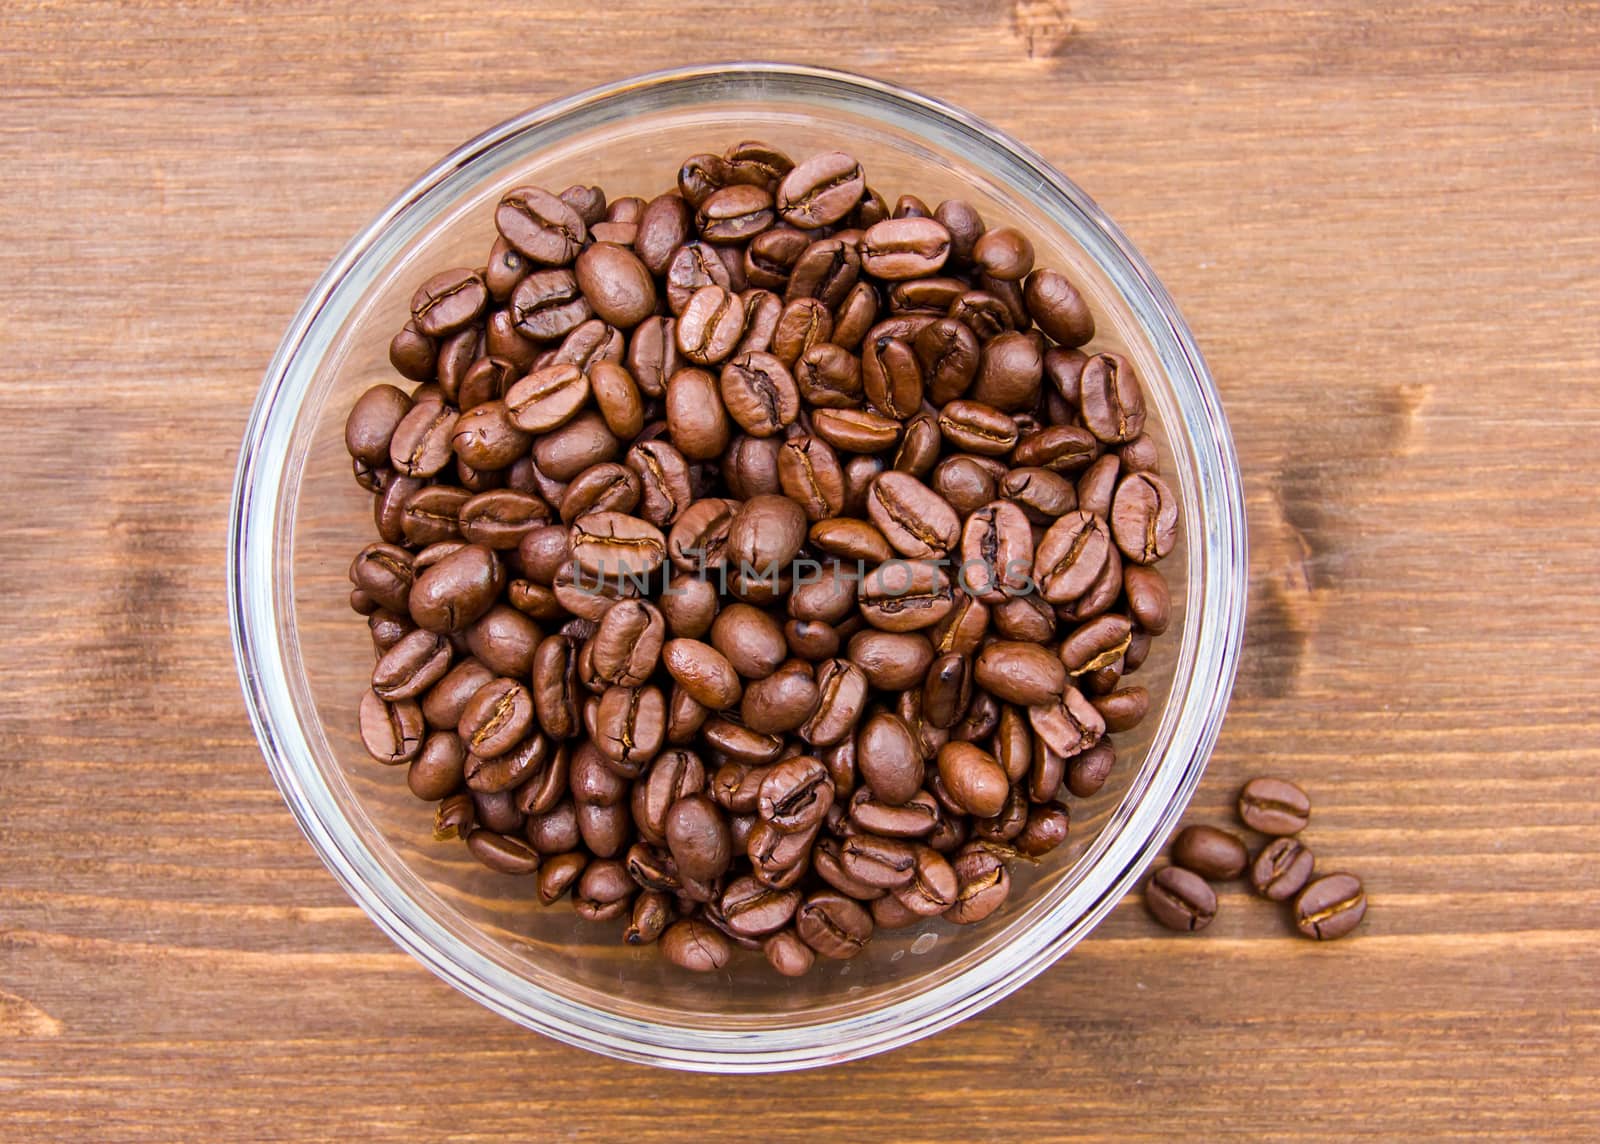 Coffee beans on bowl on wooden table seen from above